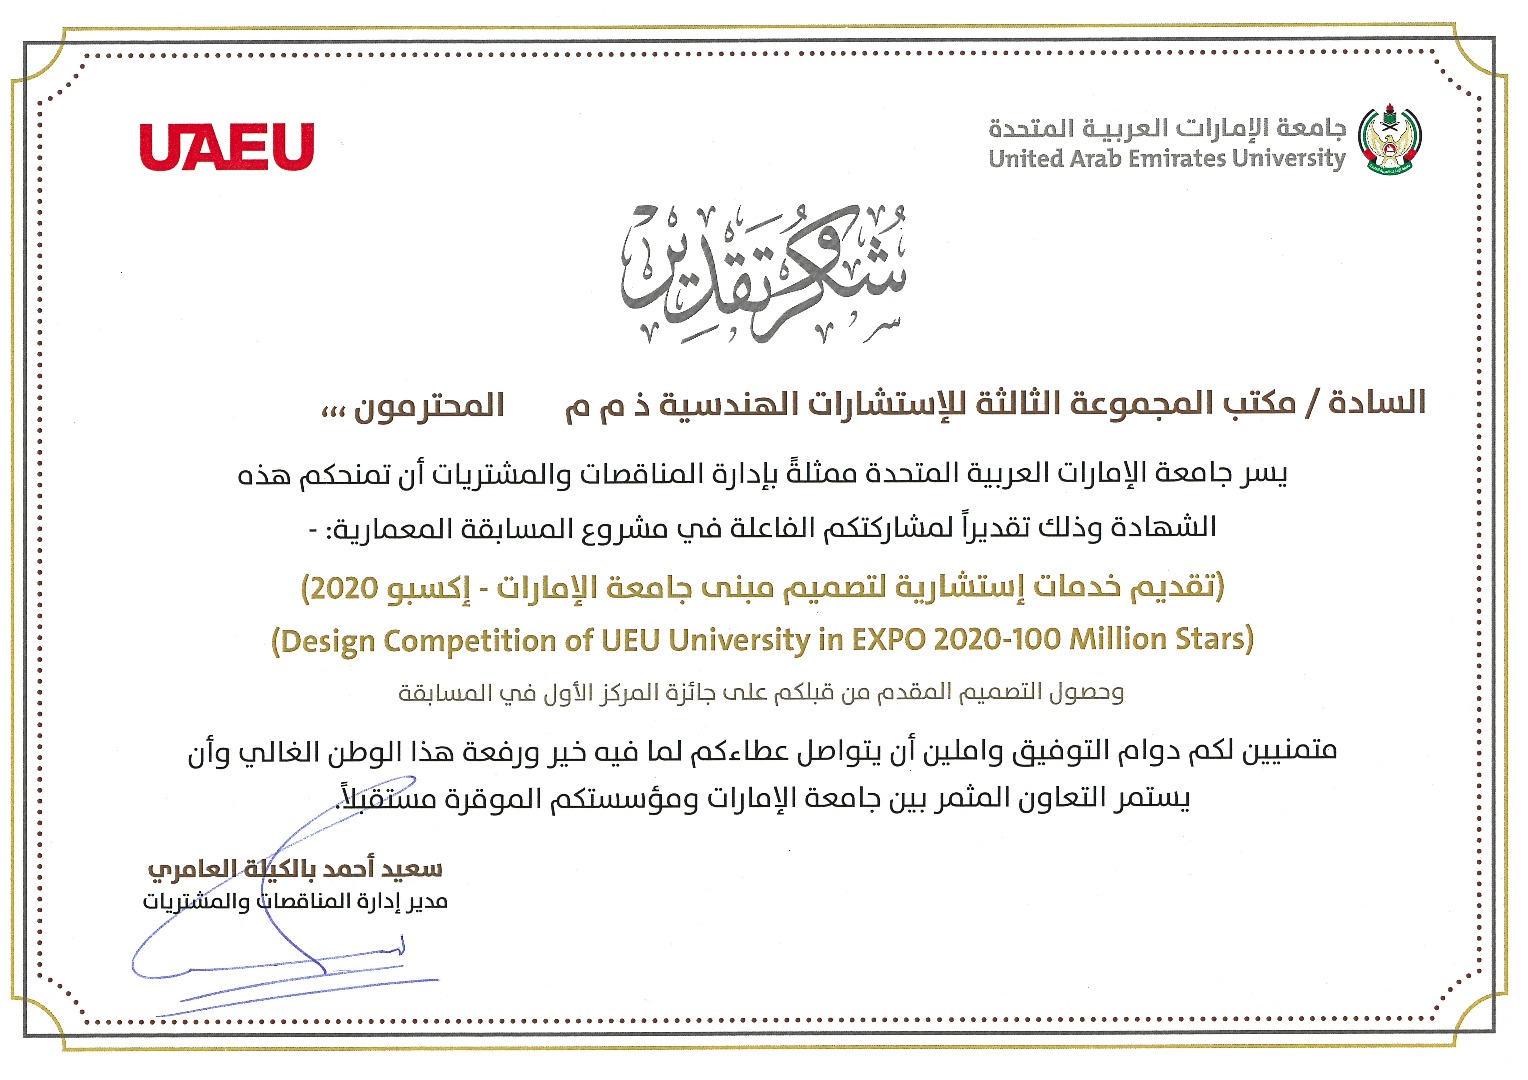 3G's UAEU Design of the Science and Innovation Research Center